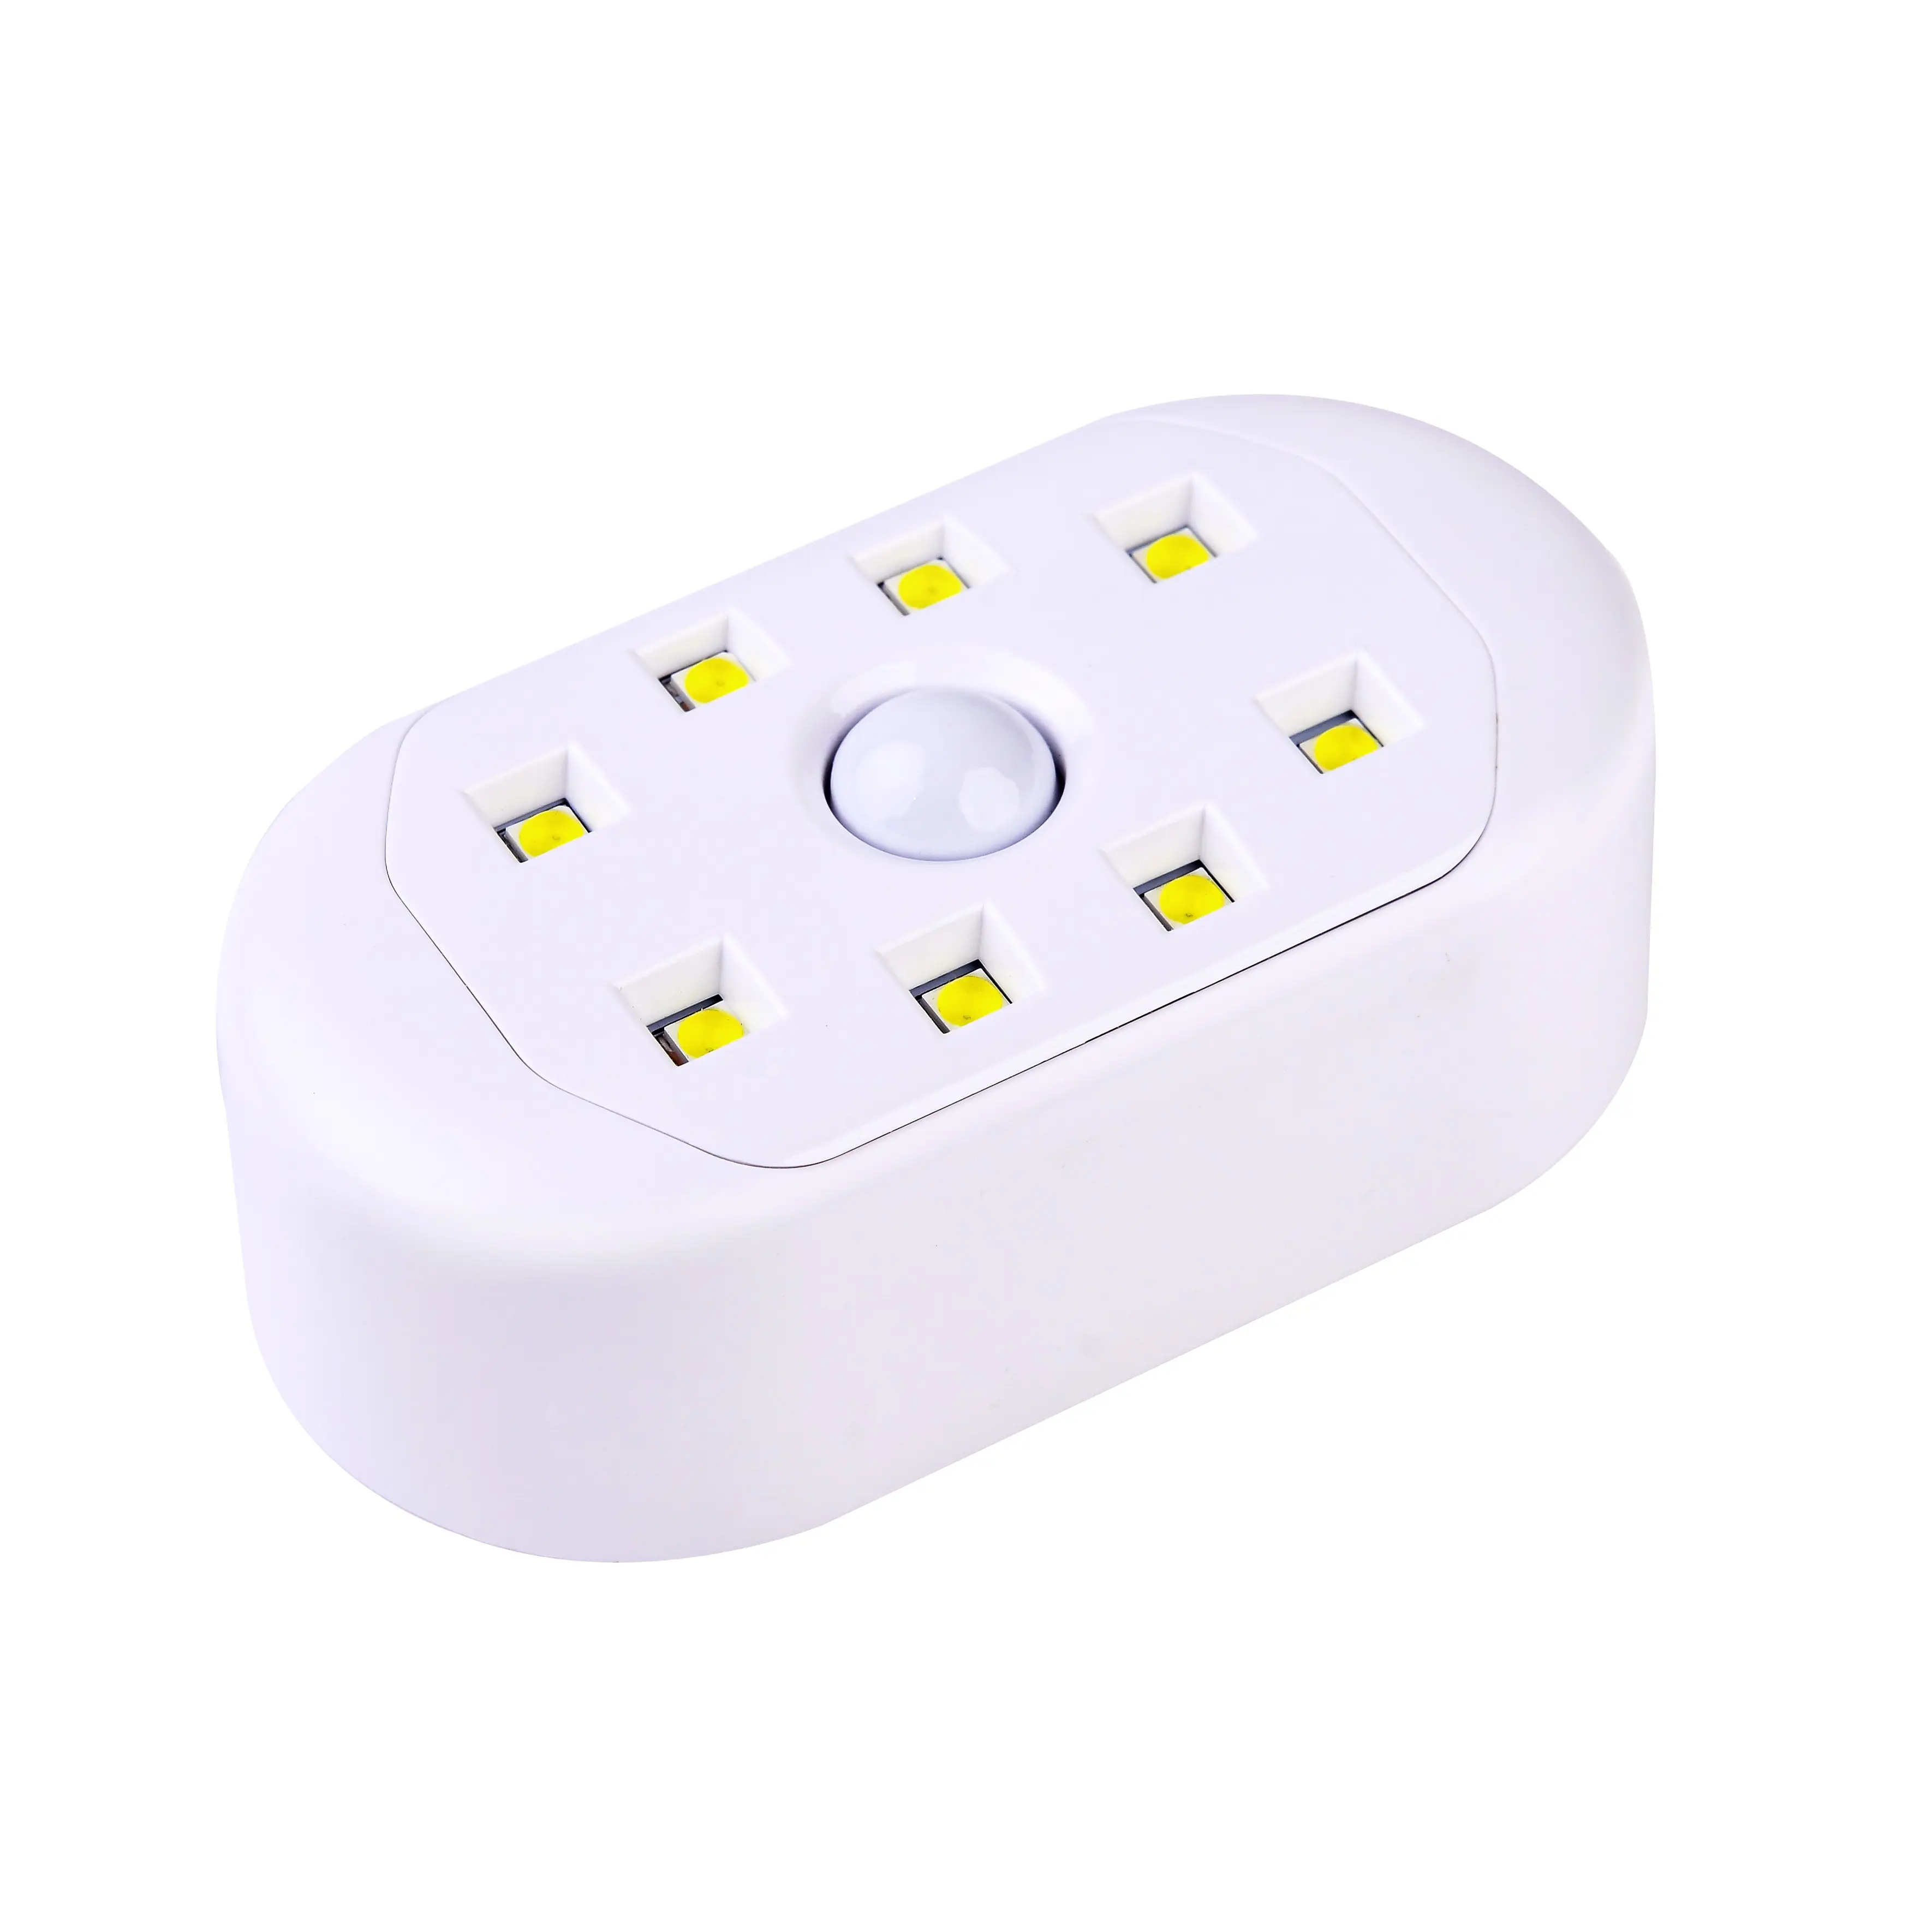 Factory price Professional table rechargeable dual mini wireless lampara uv lamp set nail dryer drying led lamp